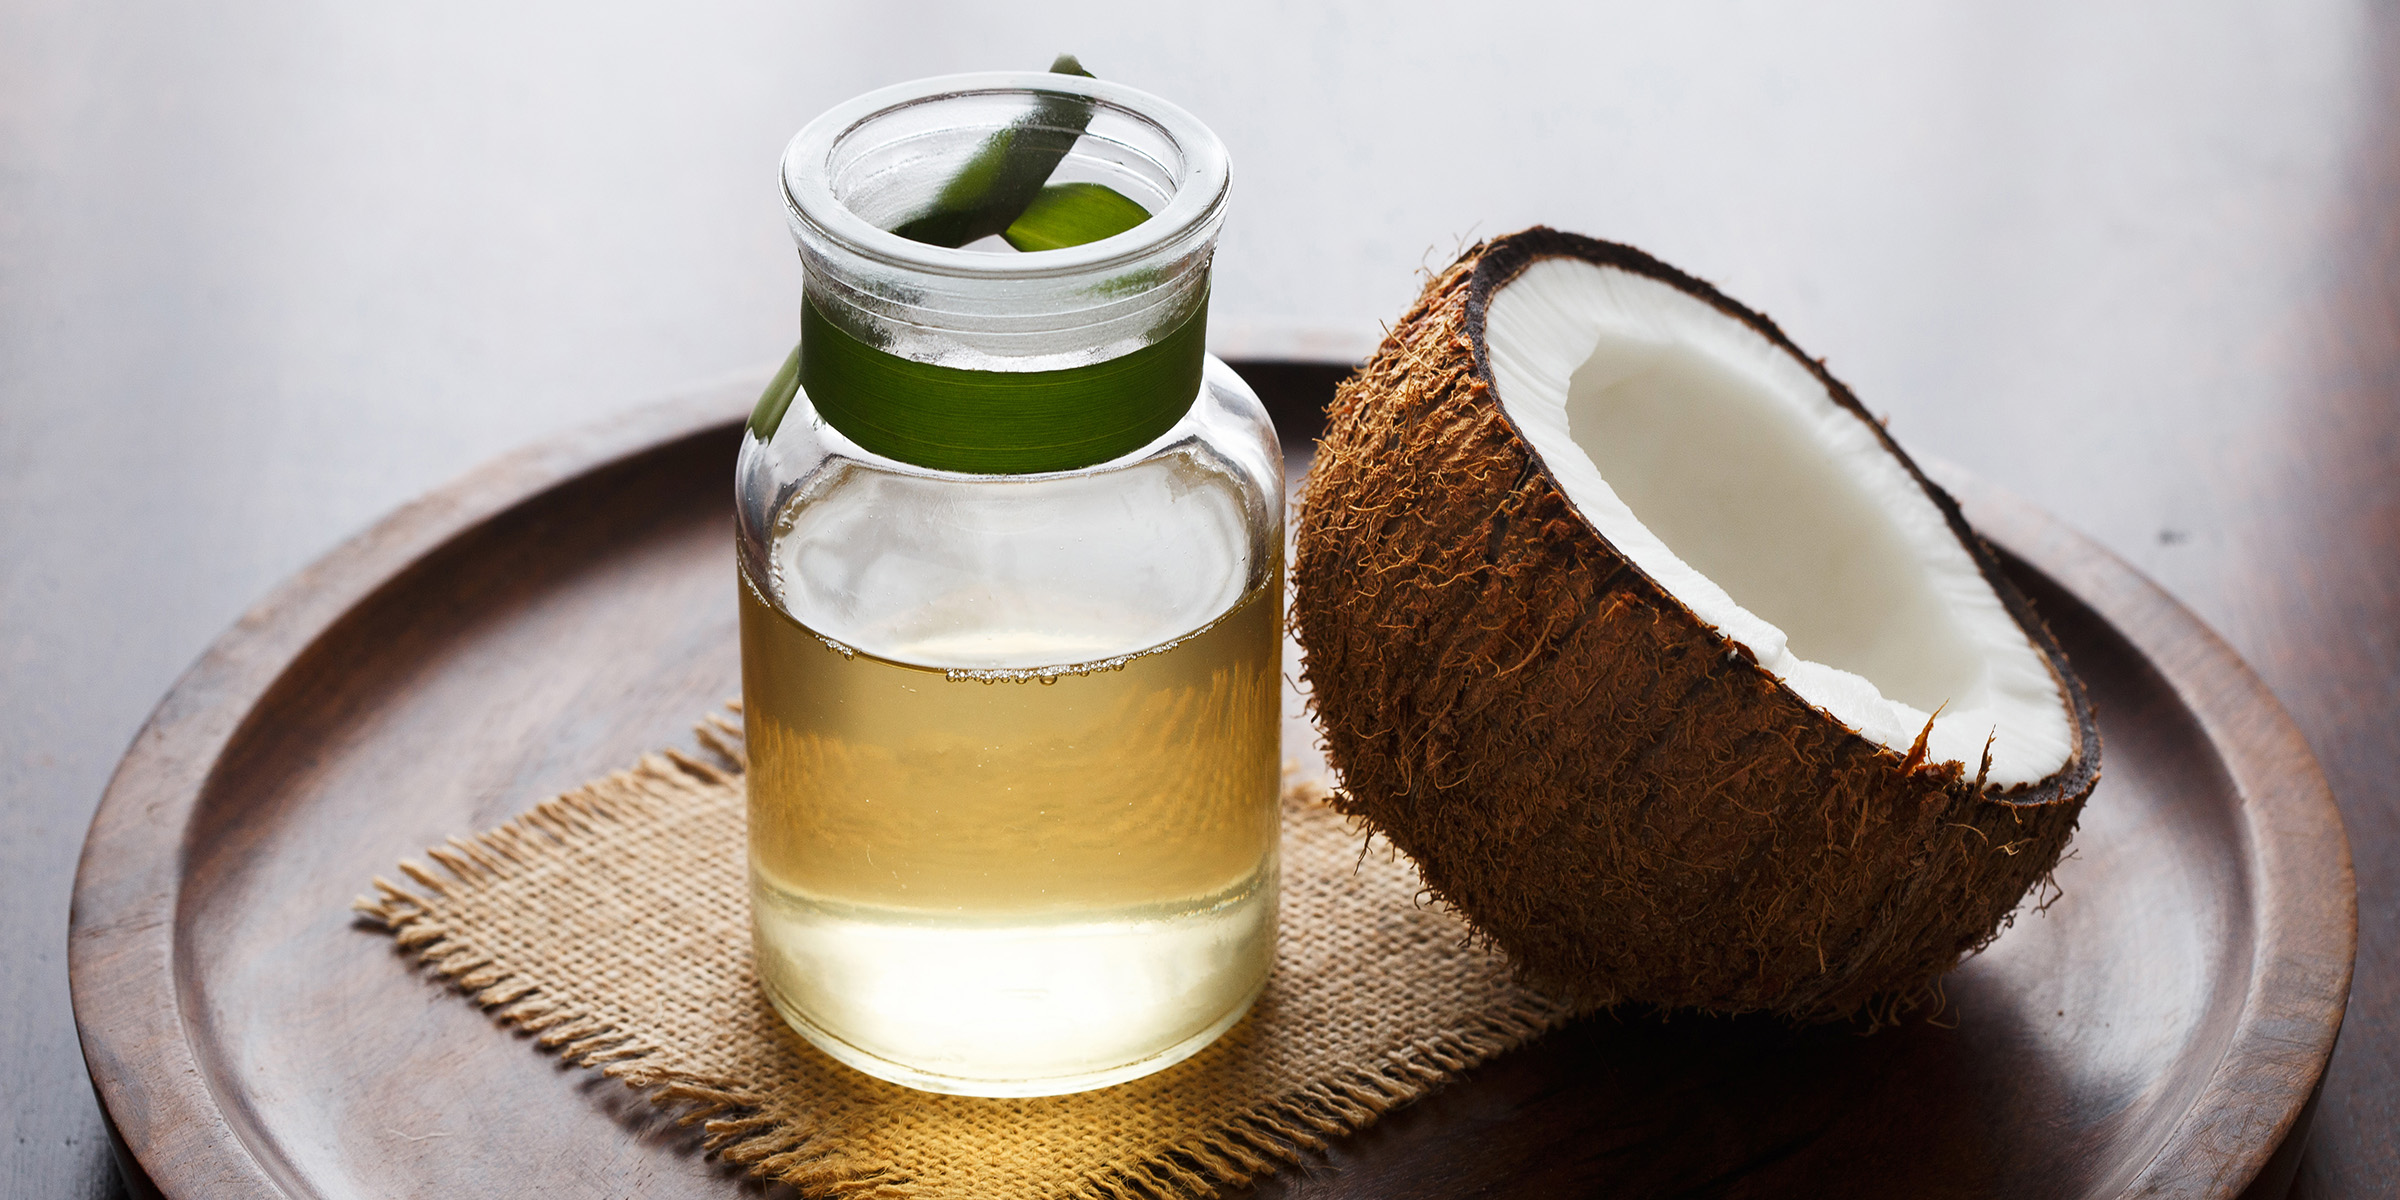 Benefits Of Coconut Oil for Your Health